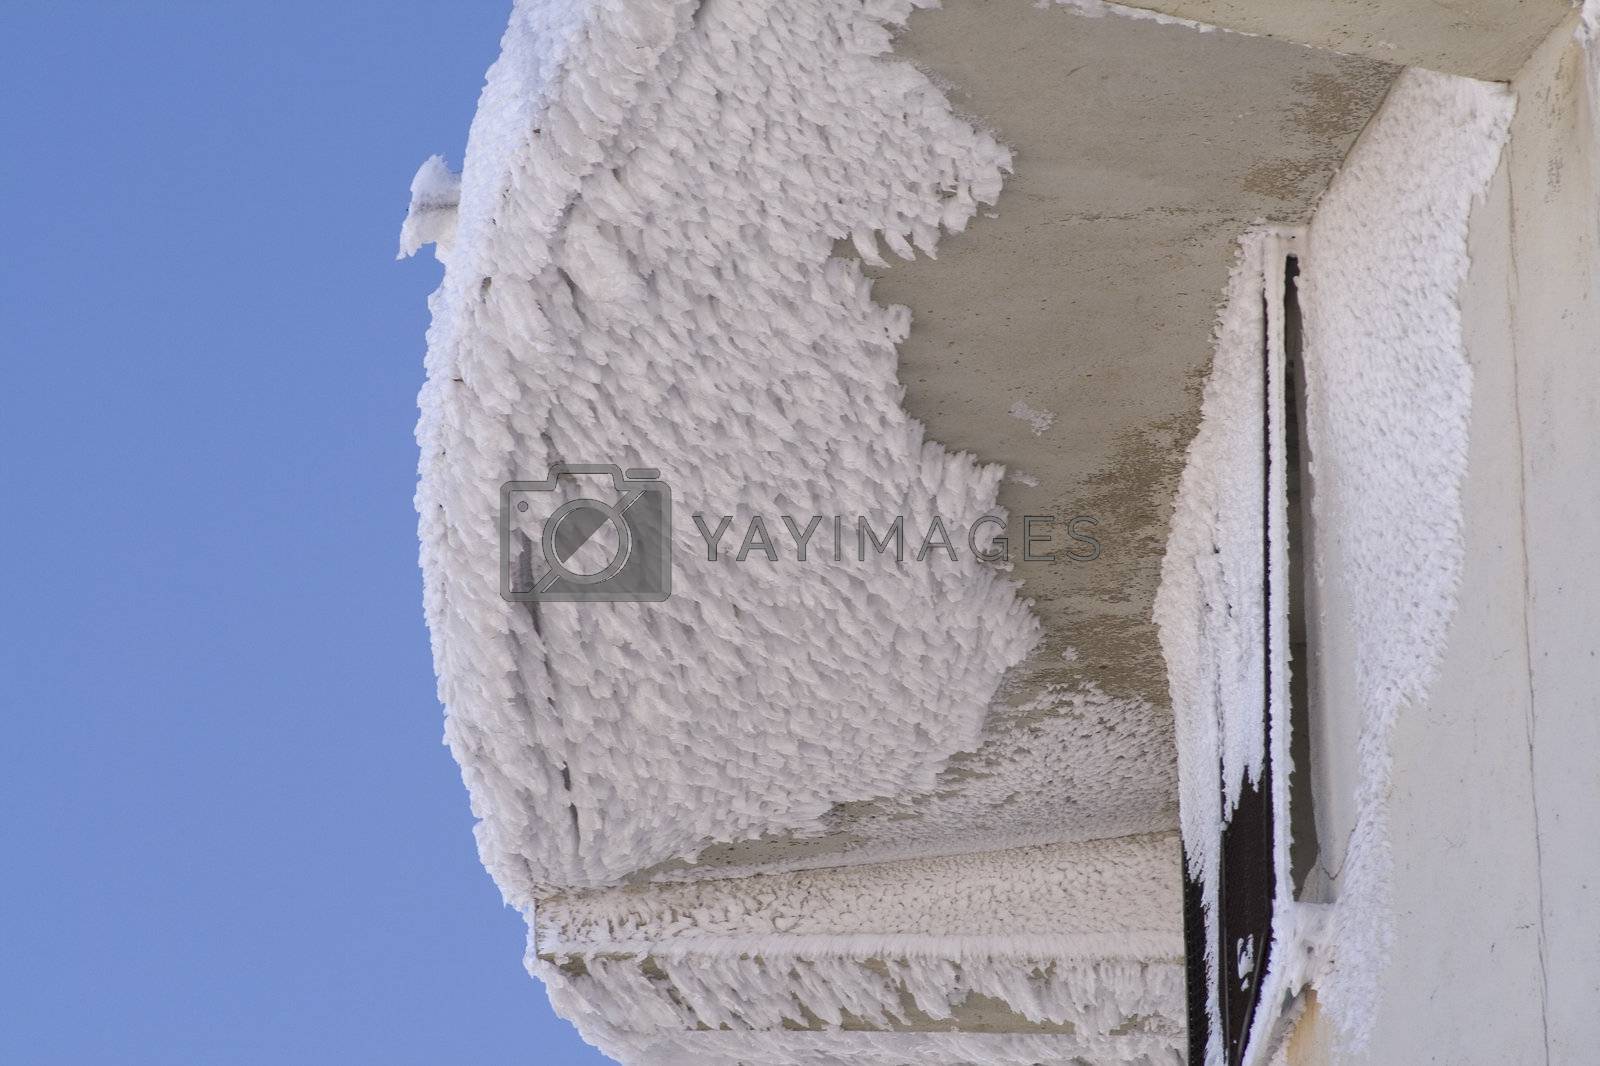 Royalty free image of Ice on roof by PauloResende